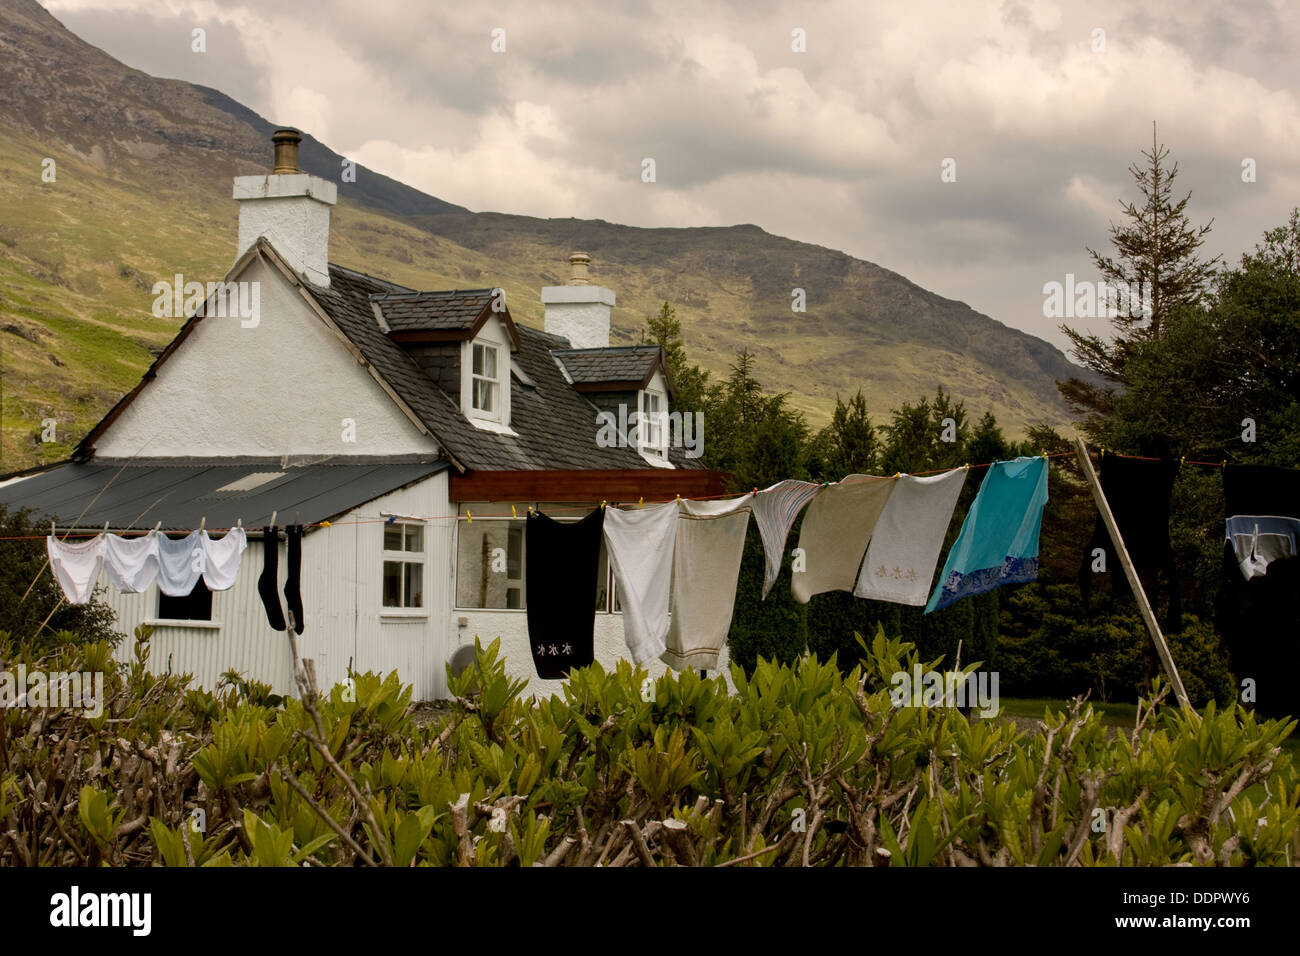 White cottage with washing on line on cloudy day, Isle of Mull, Scotland Stock Photo